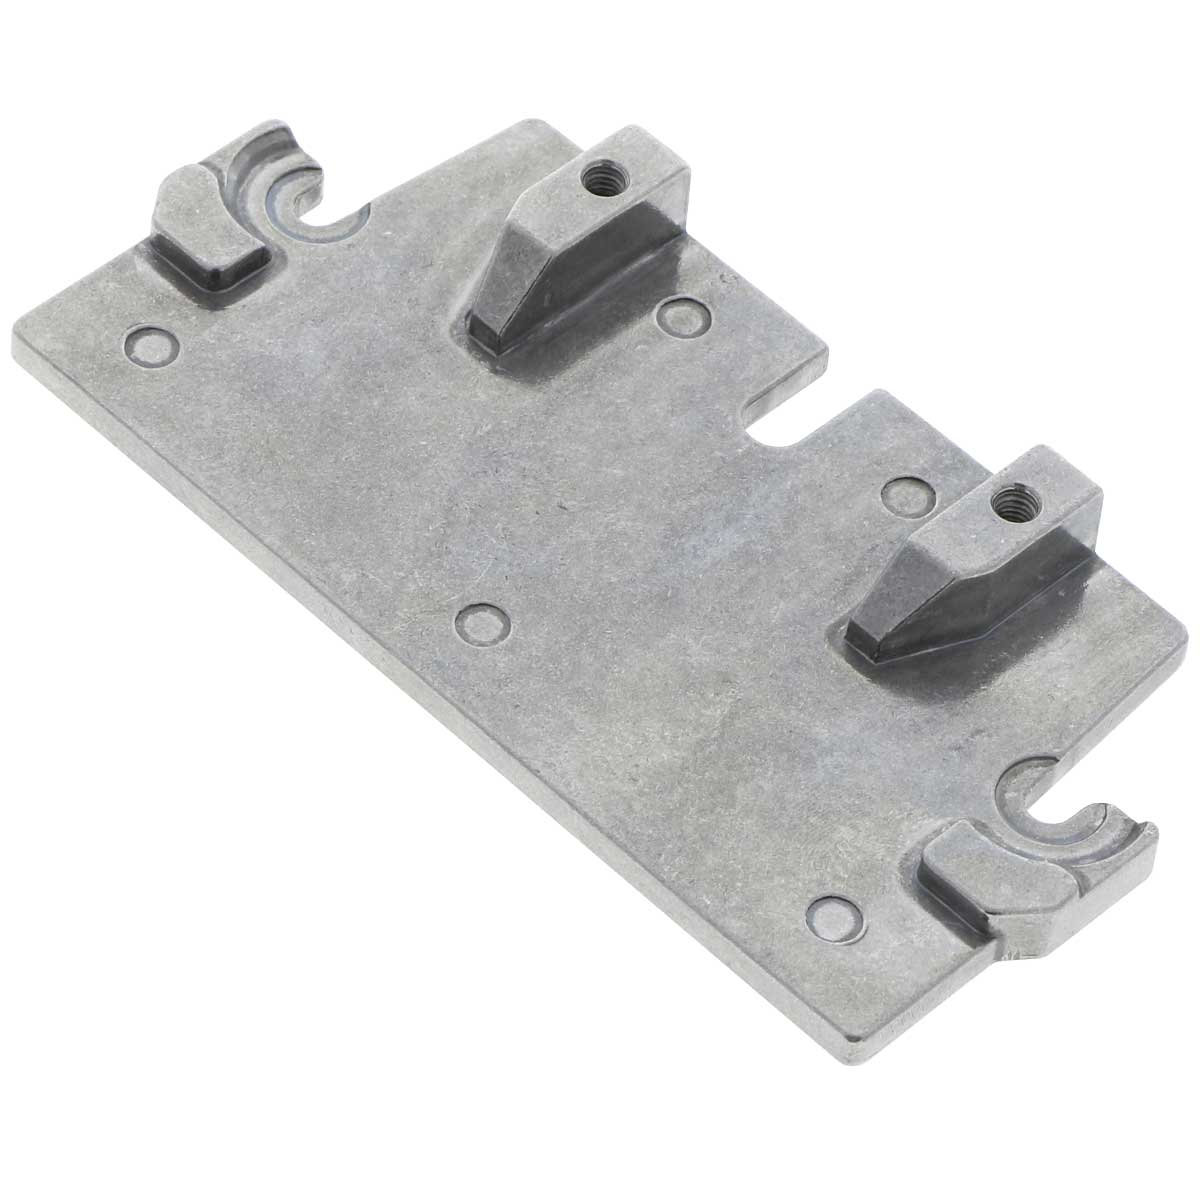 TapeTech 812018 Connector Plate for 88TTE